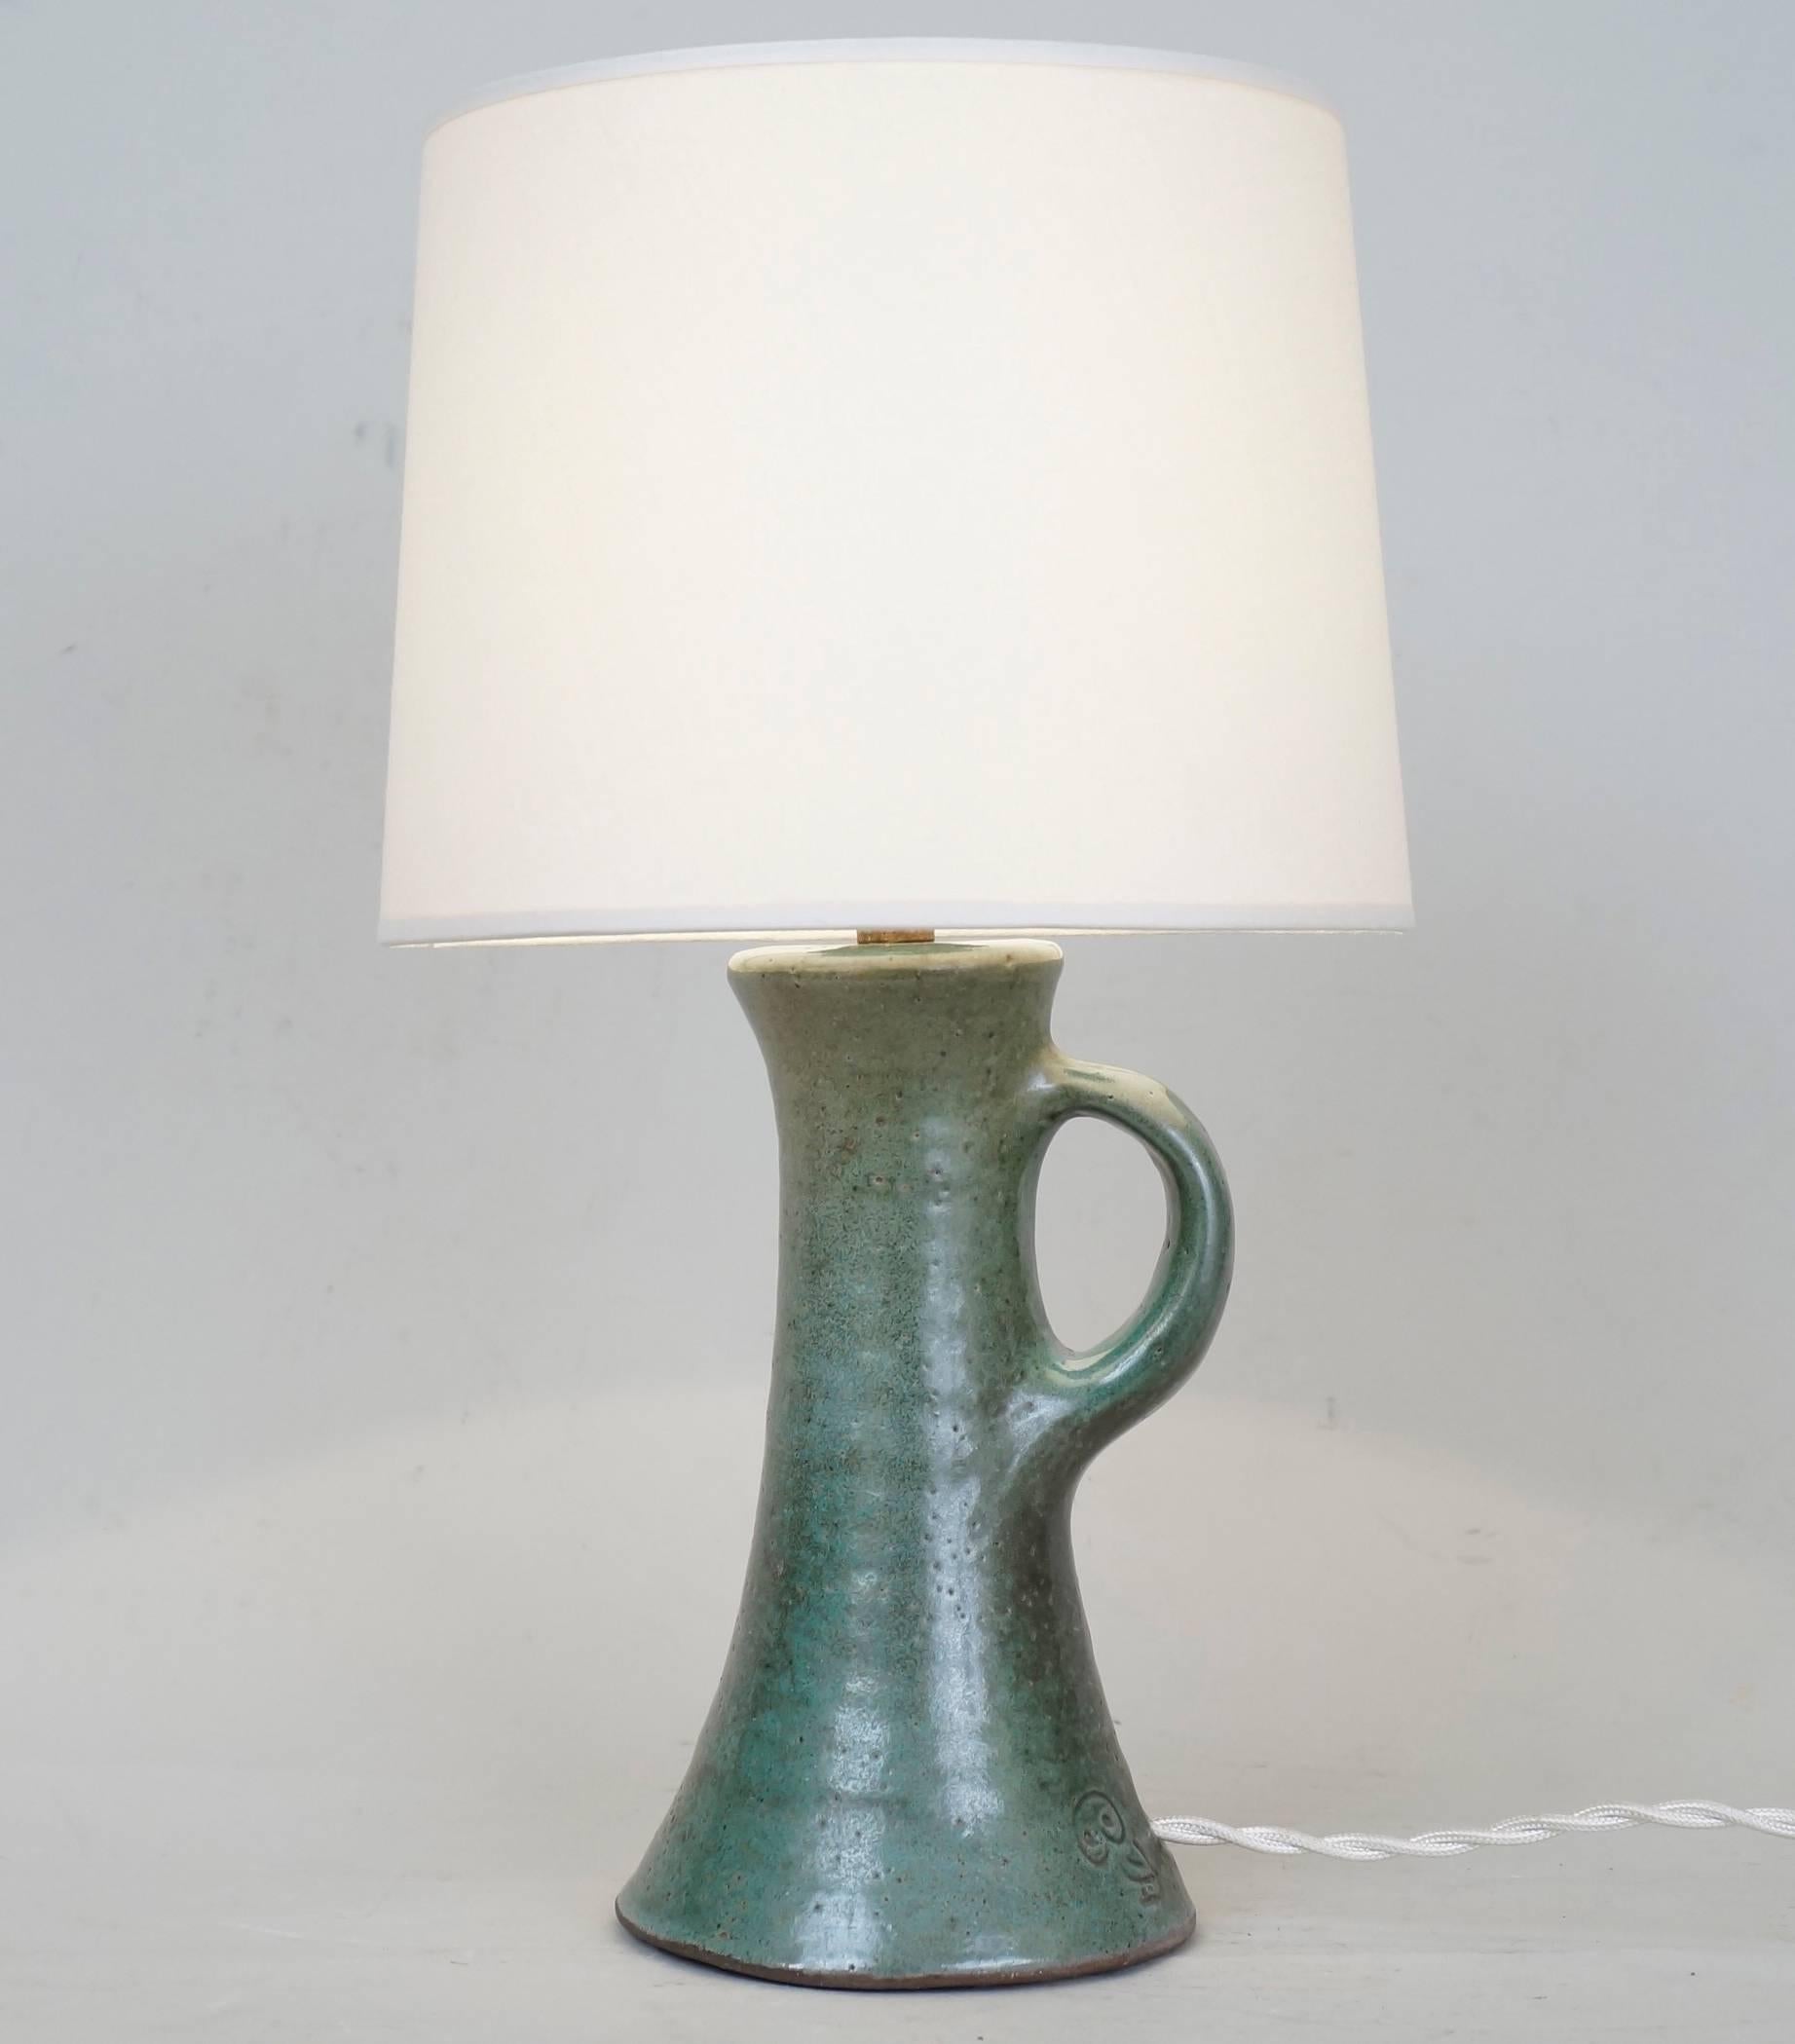 Green ceramic table lamp by J&N Pierlot signed by the owl.
Custom-made fabric lampshade.
Rewired with twisted silk cord.
US standard plug on request.
Measures: Ceramic body height: 17 cm - 6.7 in.
Height with lampshade: 32 cm - 12.6 in.
  